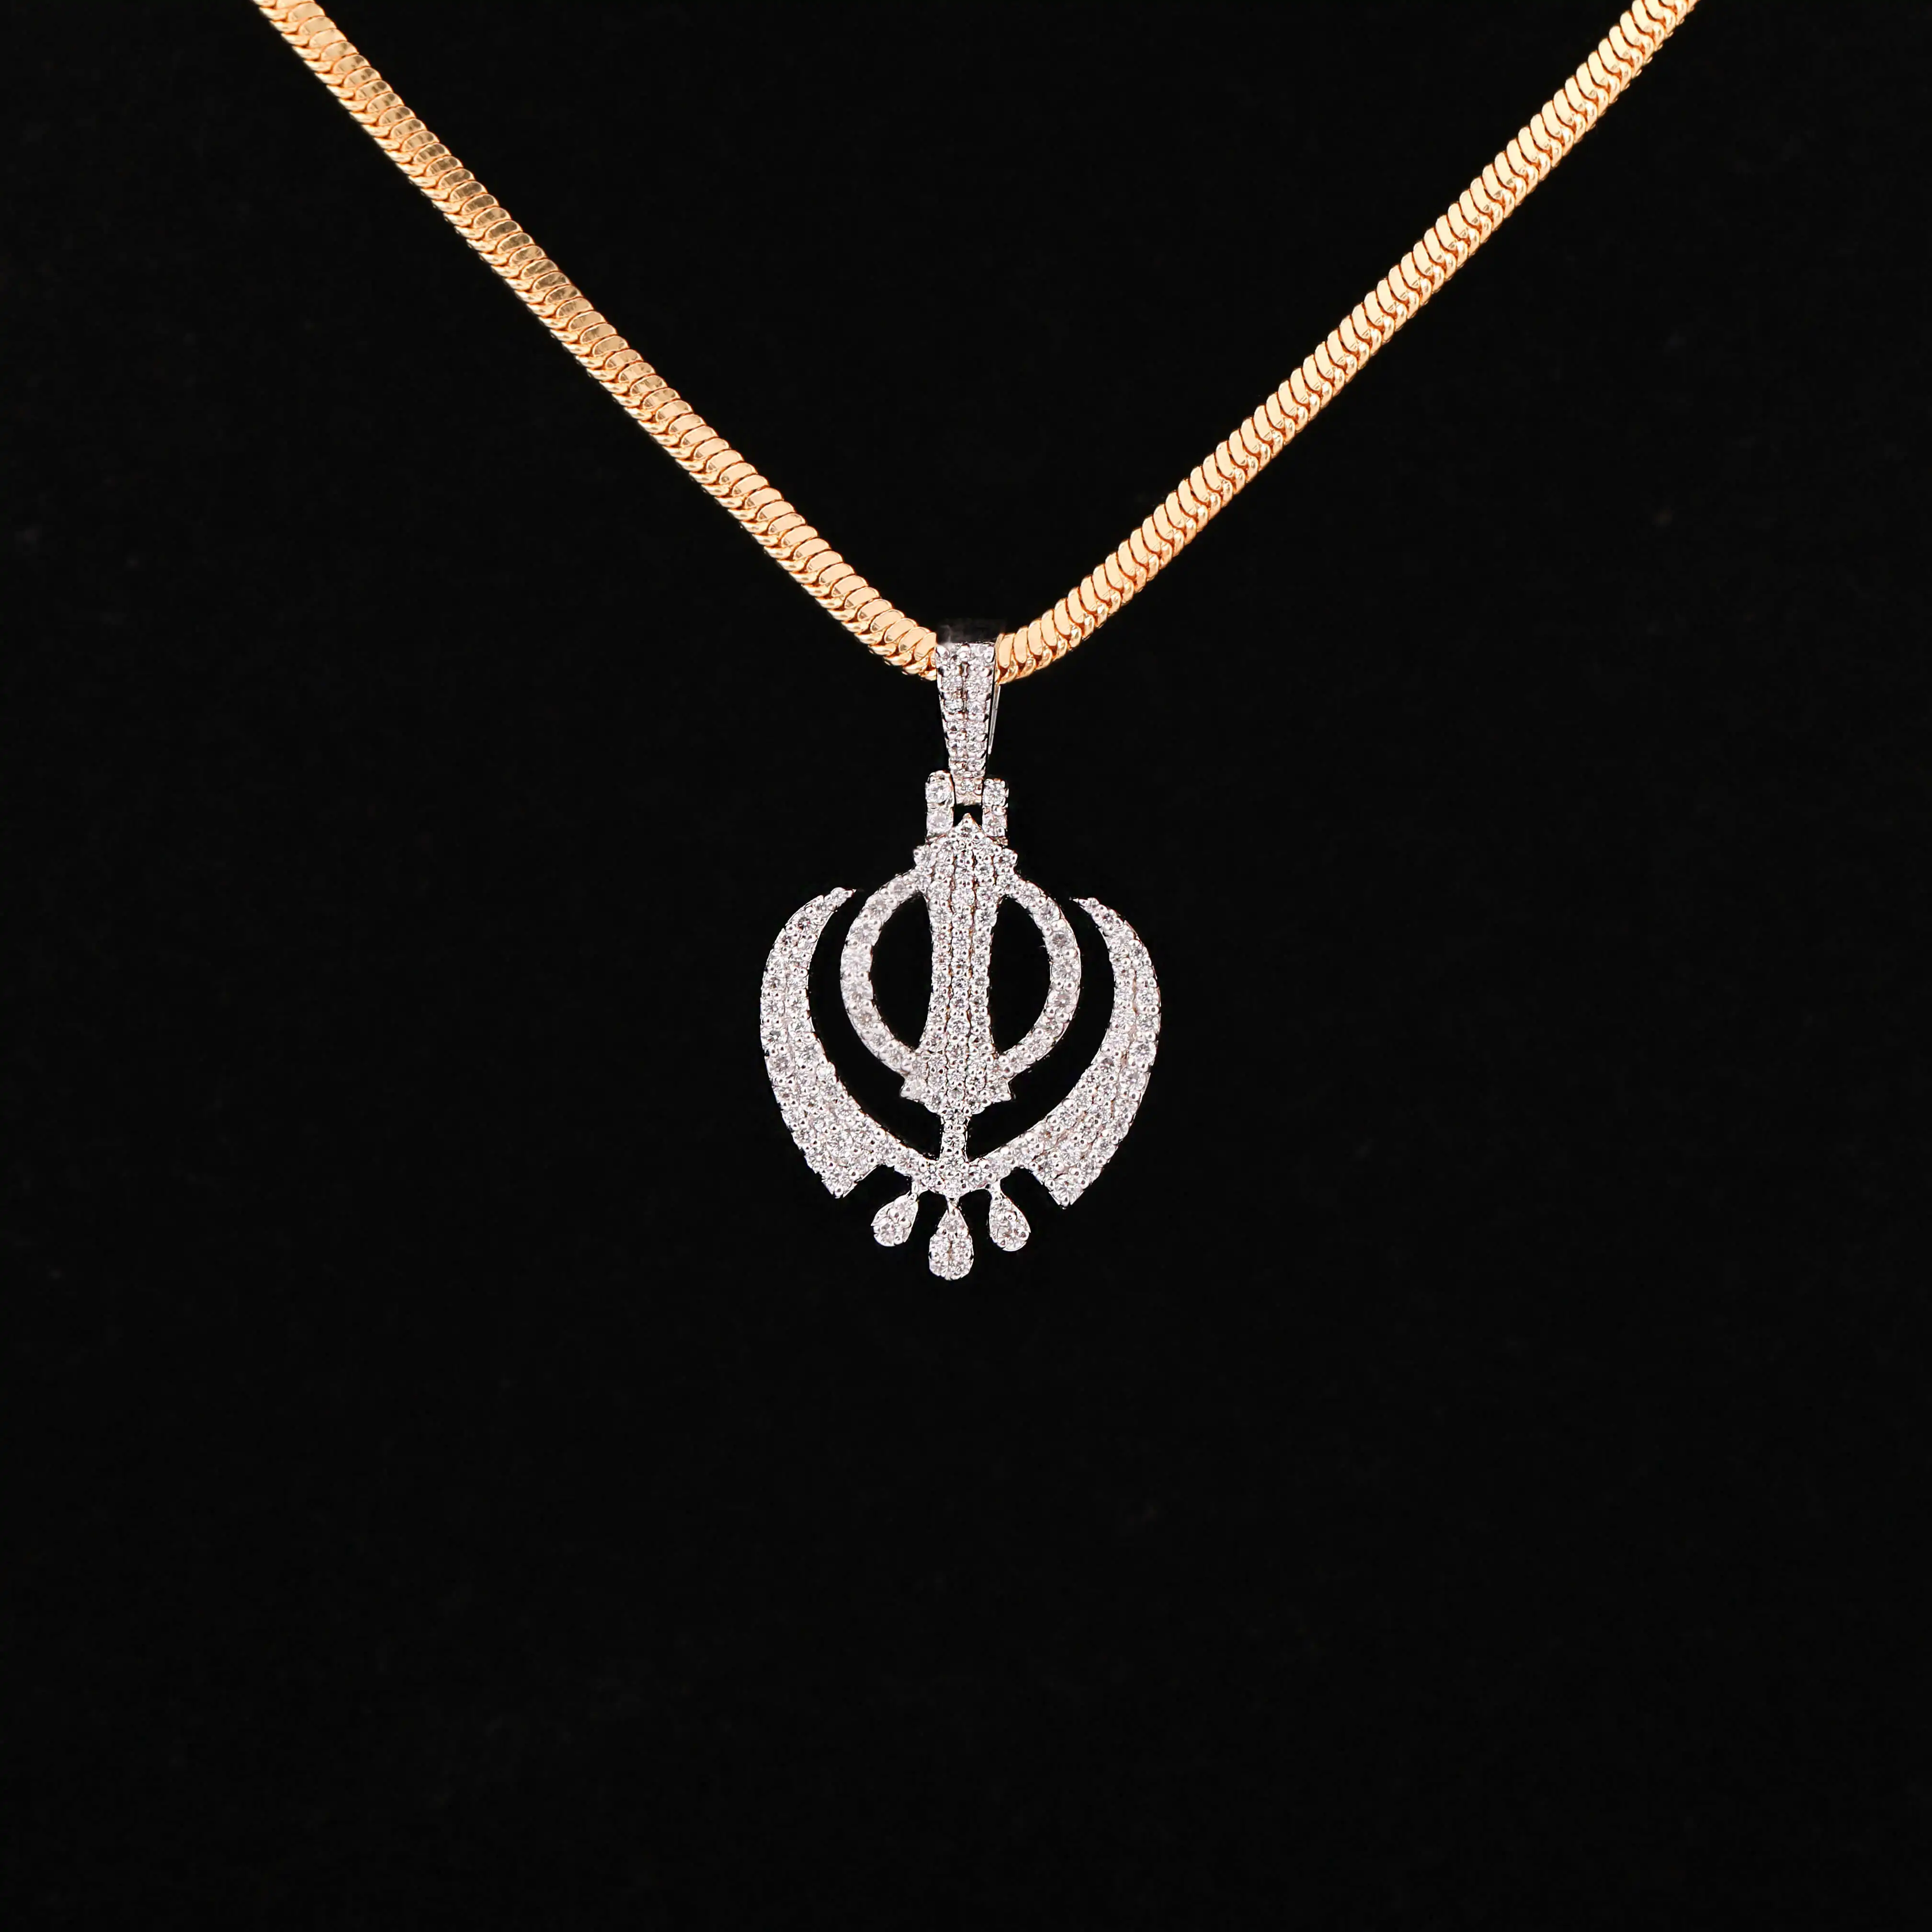 SIKH RELIGION LOGO SHAPED AESTHETIC PENDANT WITH TINEY ROUND LAB GROWN DIAMOND IN 18KT SOLID GOLD FOR ALL OCCASIONS FOR WOMEN